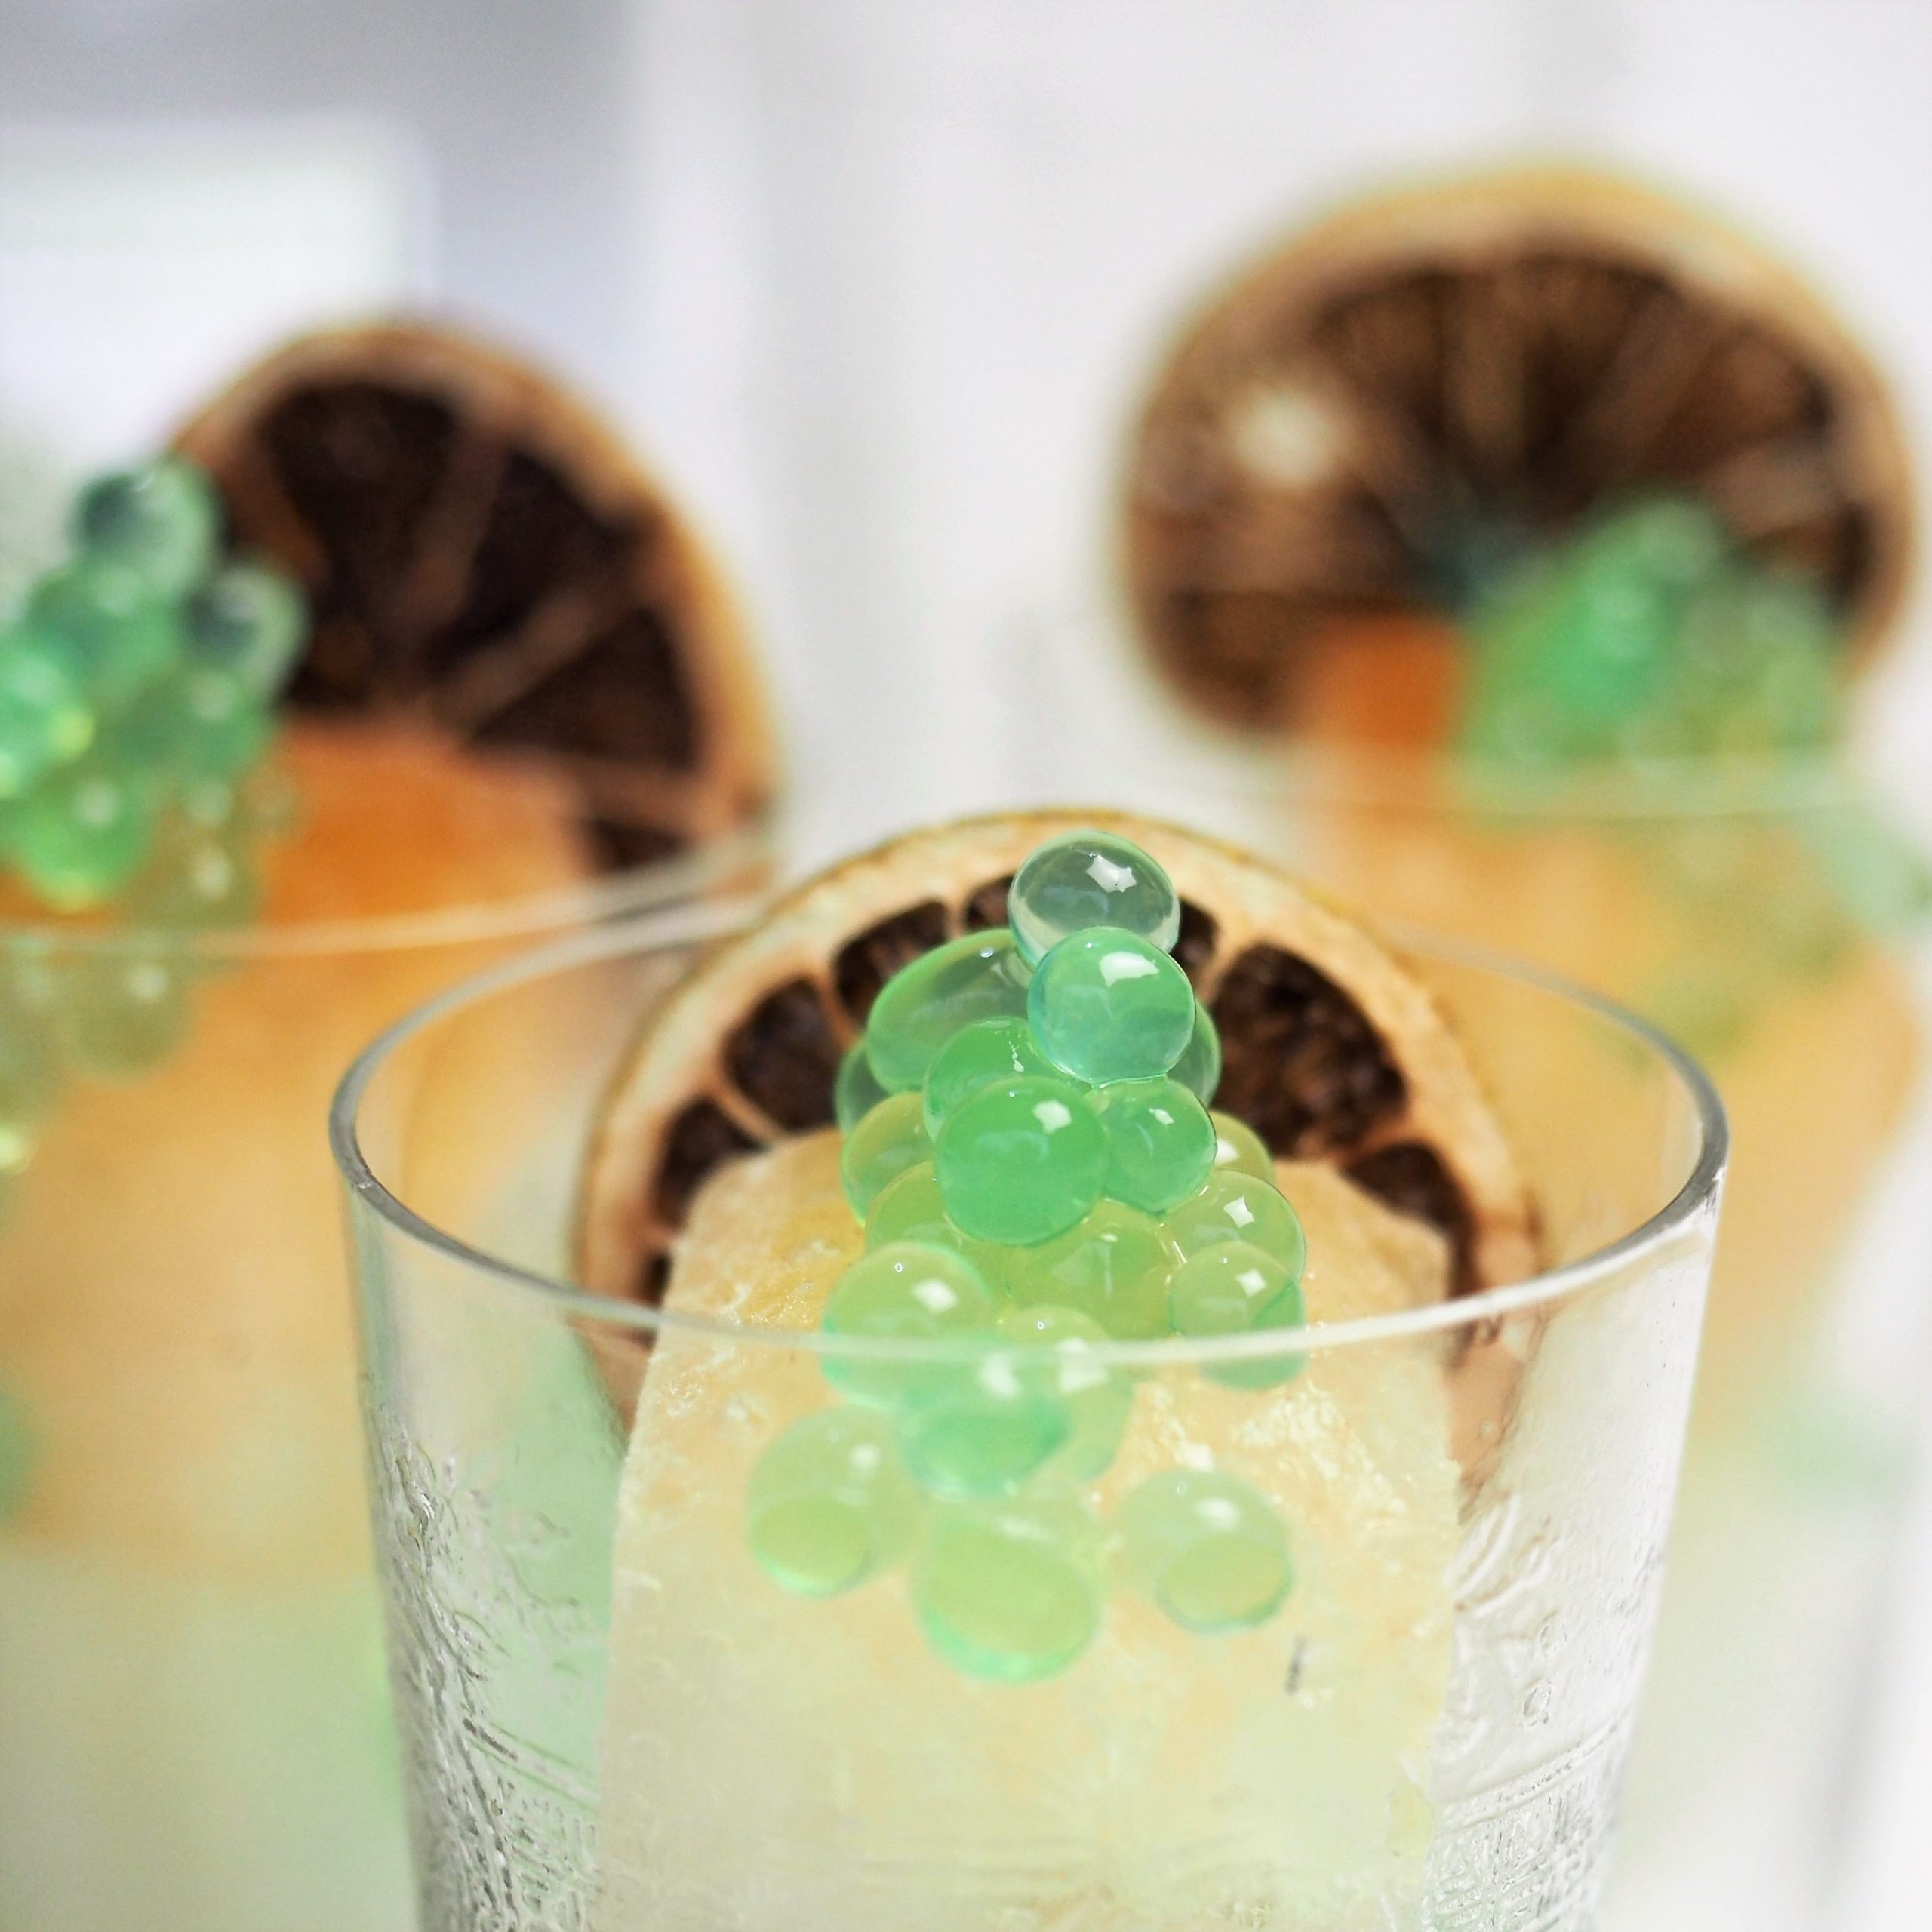 Gin & Dirty Tonic Ice with Native Finger Lime Flavour Pearls